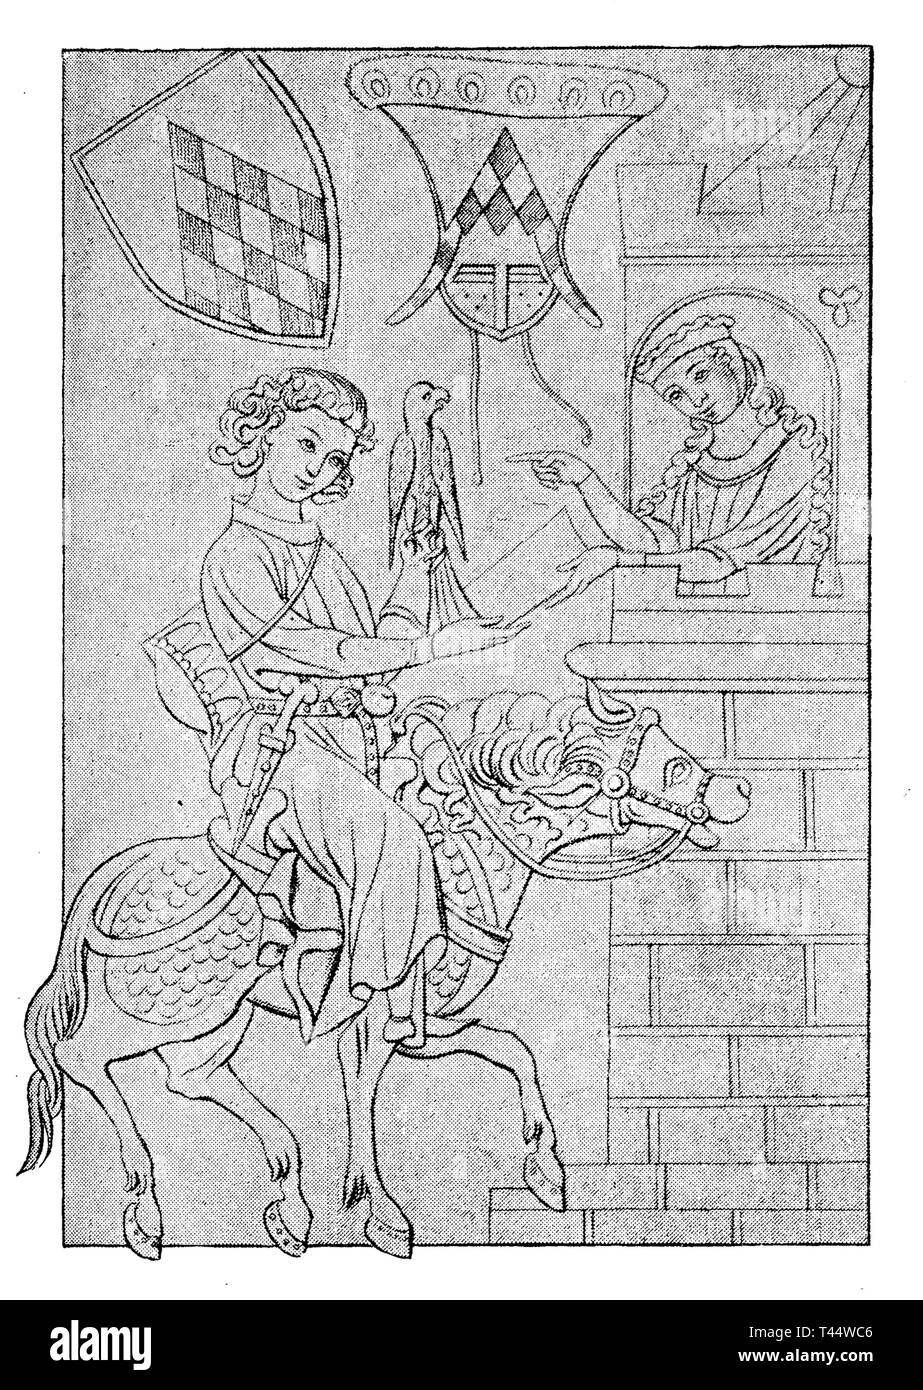 Old drawing describing the Knight, and the courtly love life in the Hohenstaufen times, a  dynasty of German kings in the Middle Ages Stock Photo